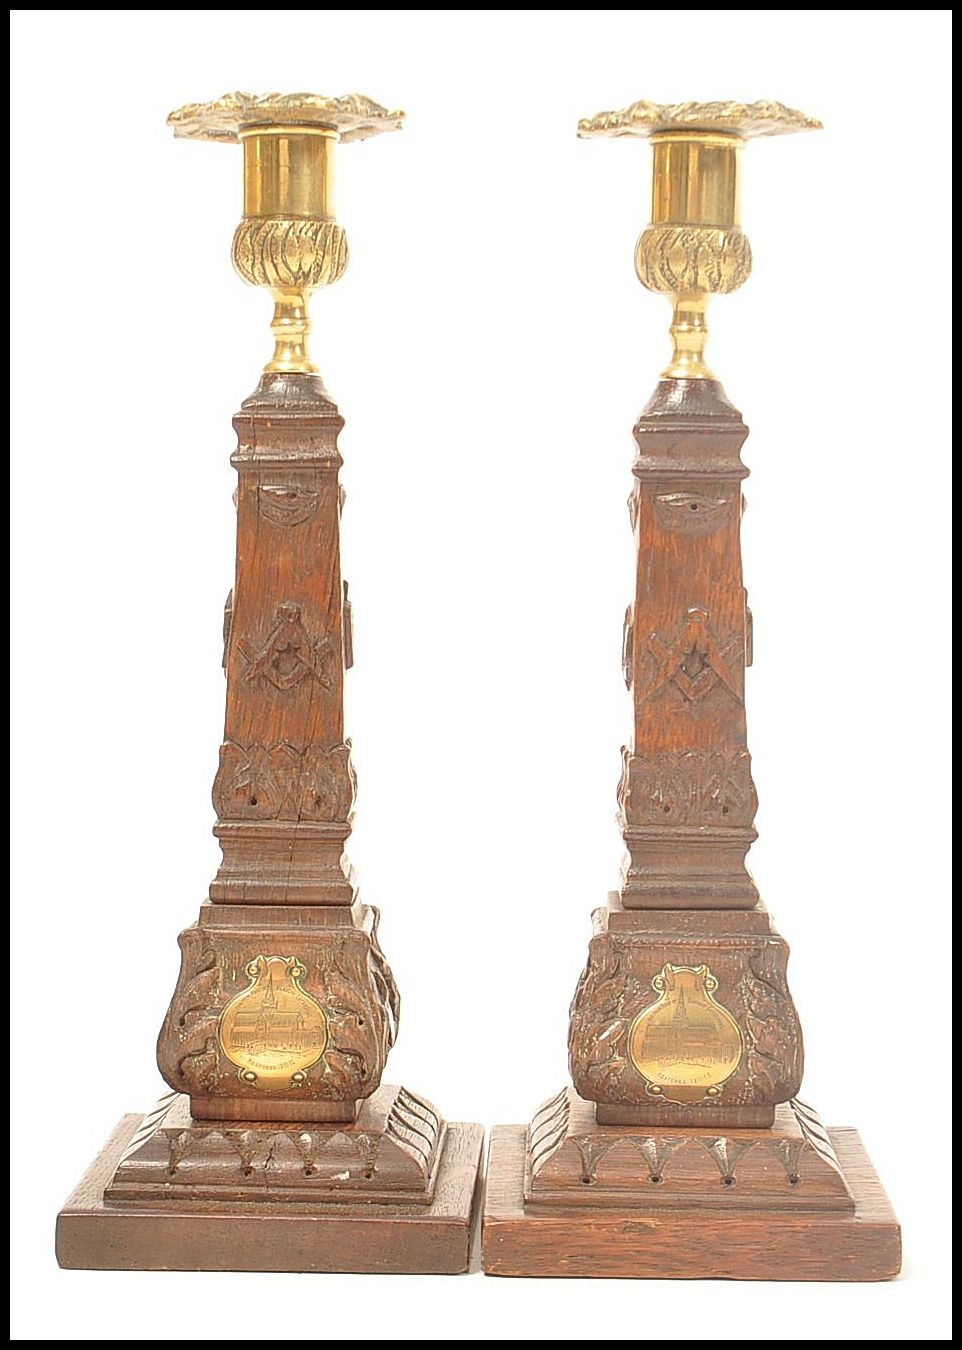 A pair of Masonic carved wooden souvenir candlestick with cast brass sockets, the base of each